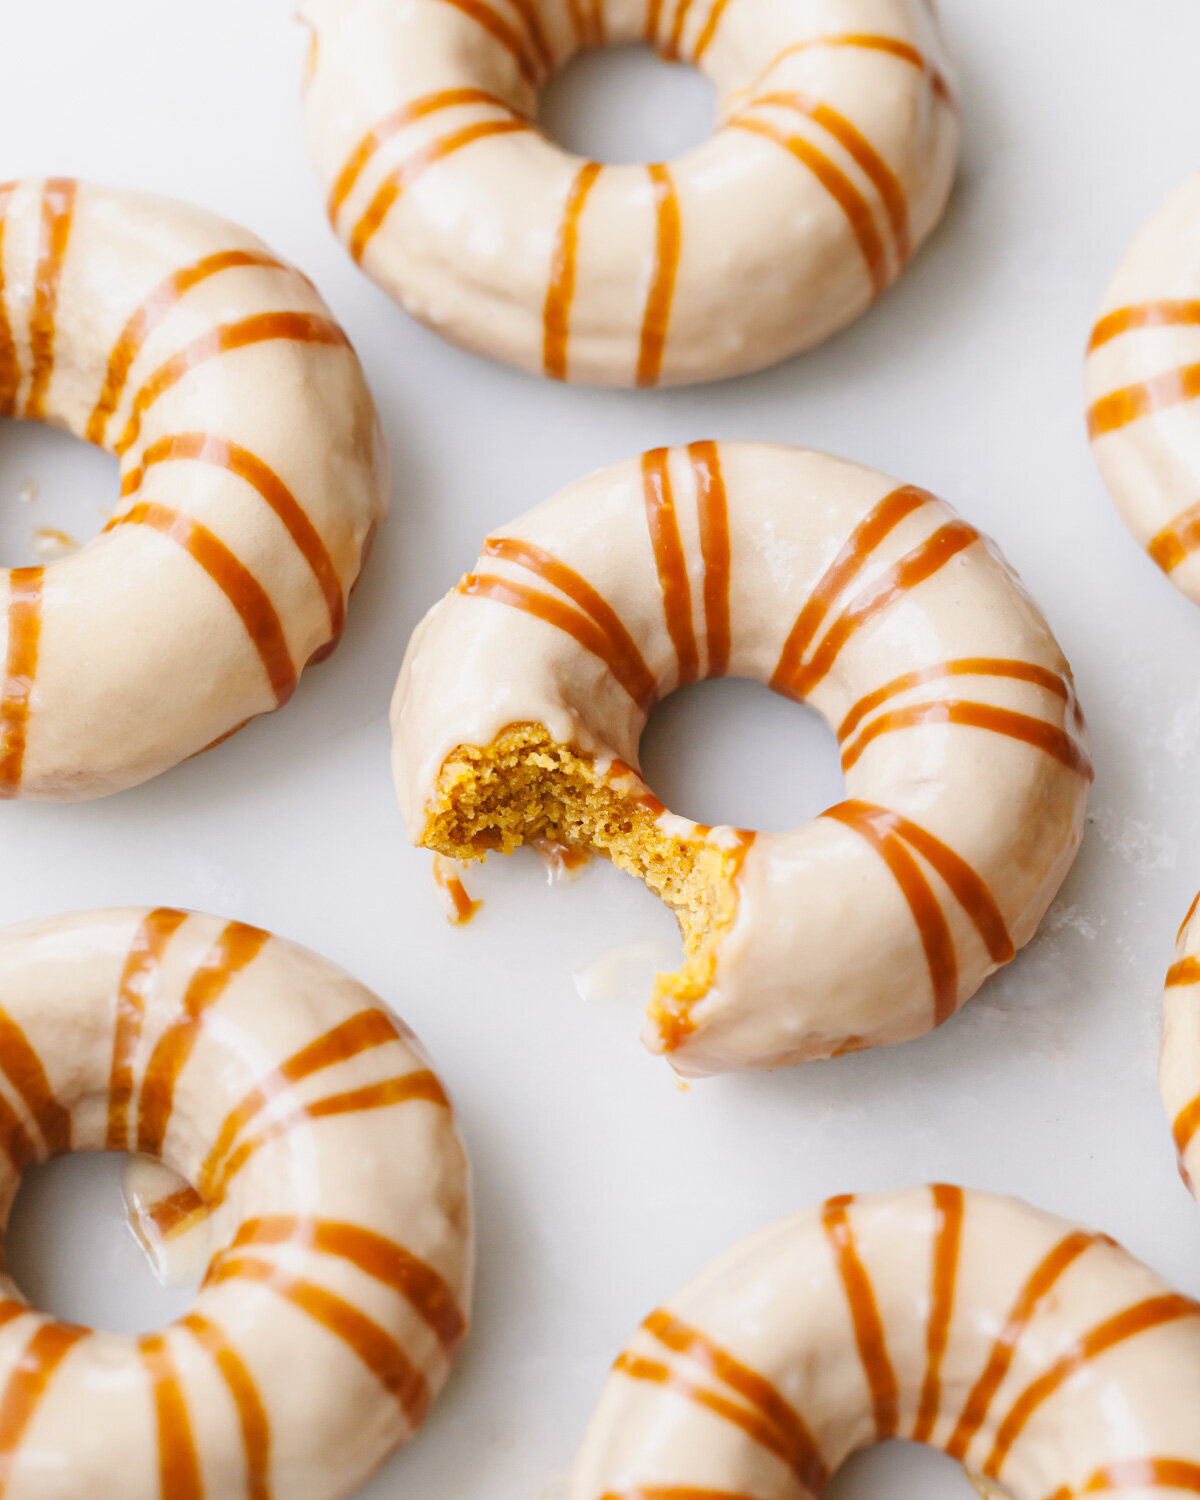 Baked pumpkin donuts with caramel glaze on top.